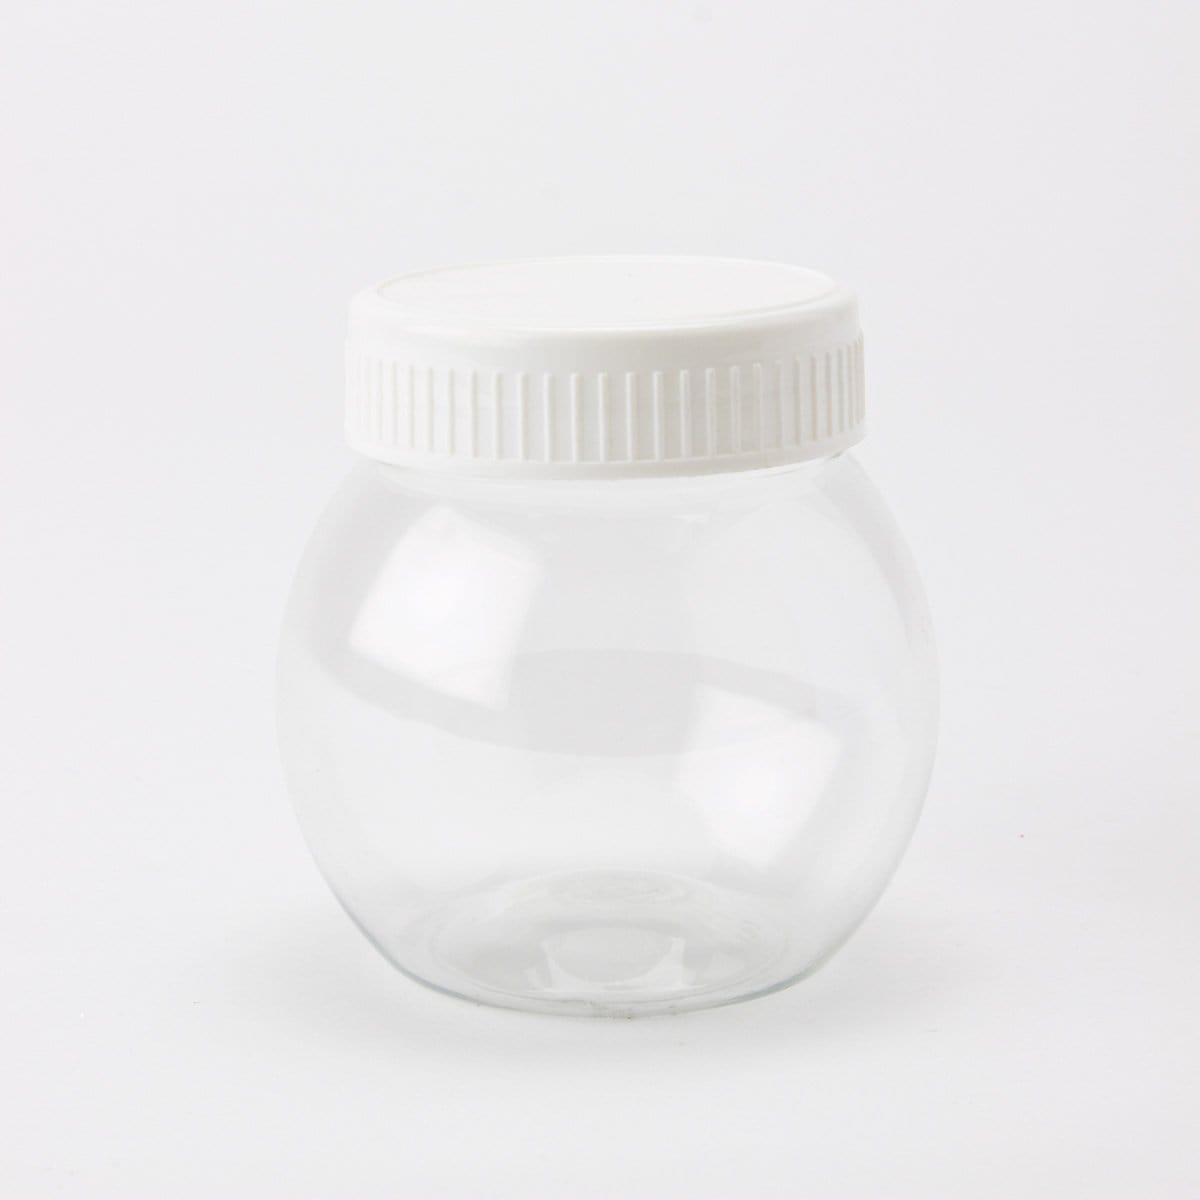 Buy Baby Shower White acrylic round jar with lid, 2.75 inches sold at Party Expert